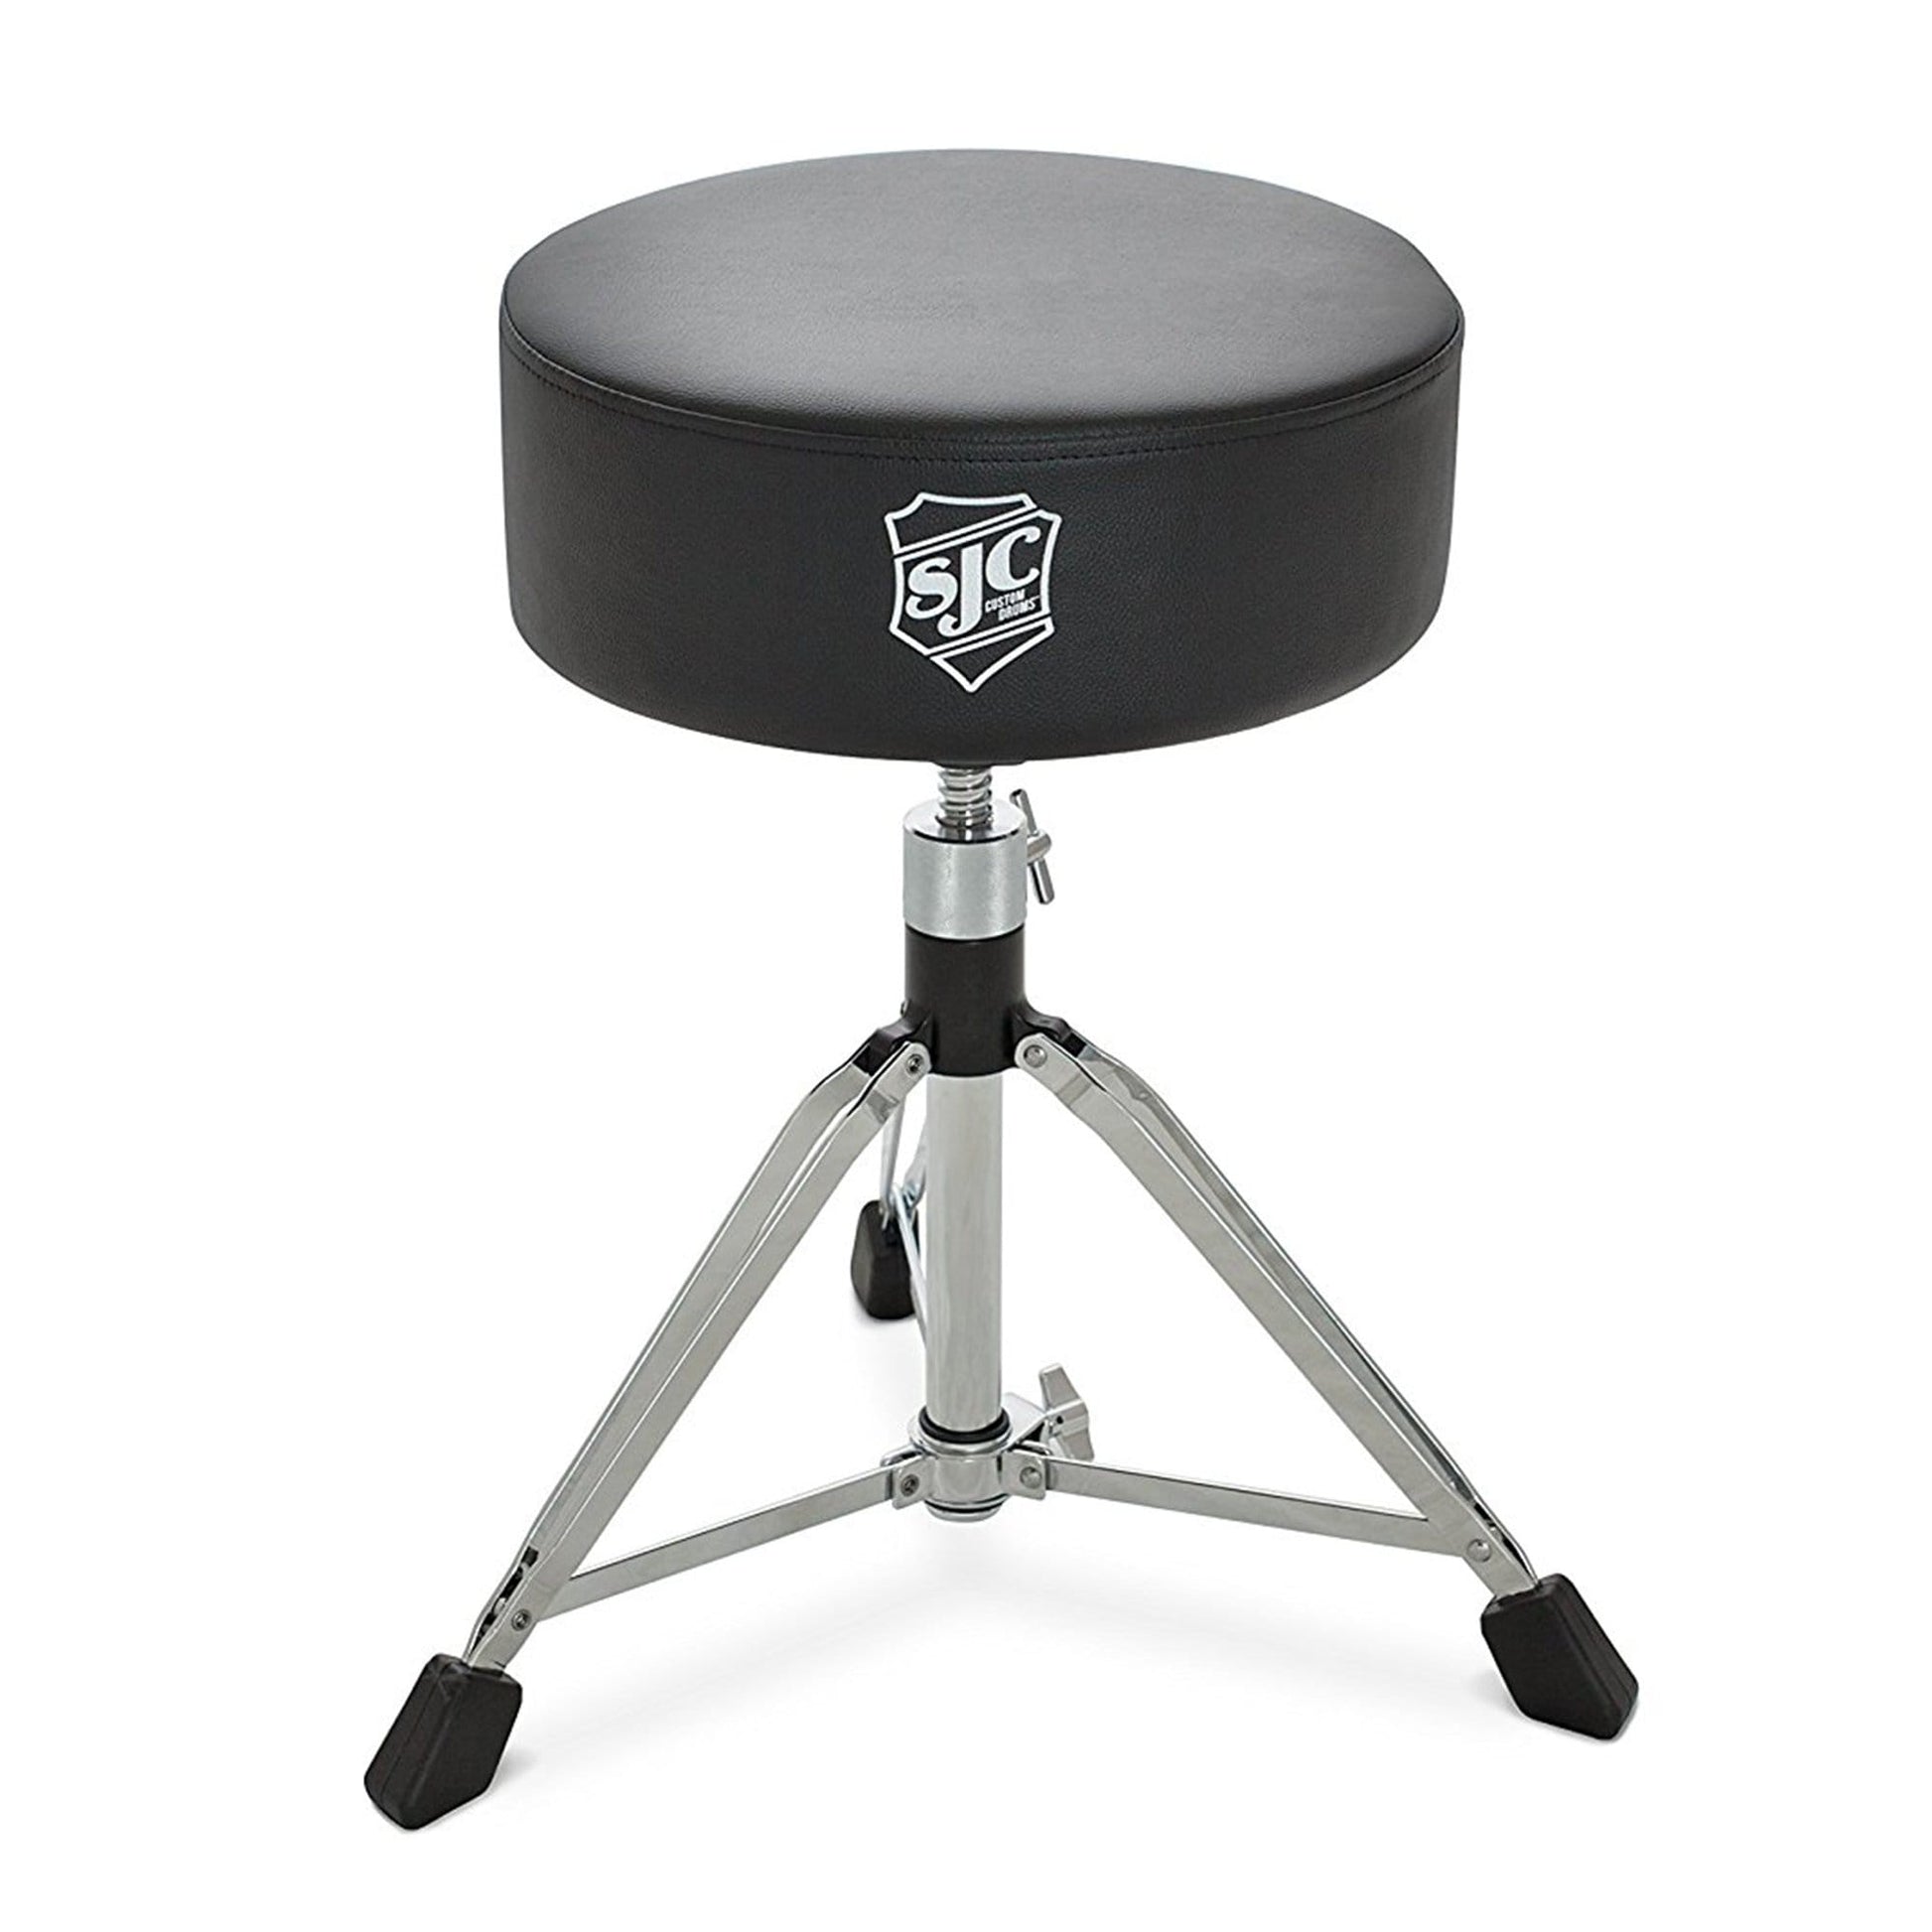 SJC Heavy Duty Drum Throne Drums and Percussion / Parts and Accessories / Thrones